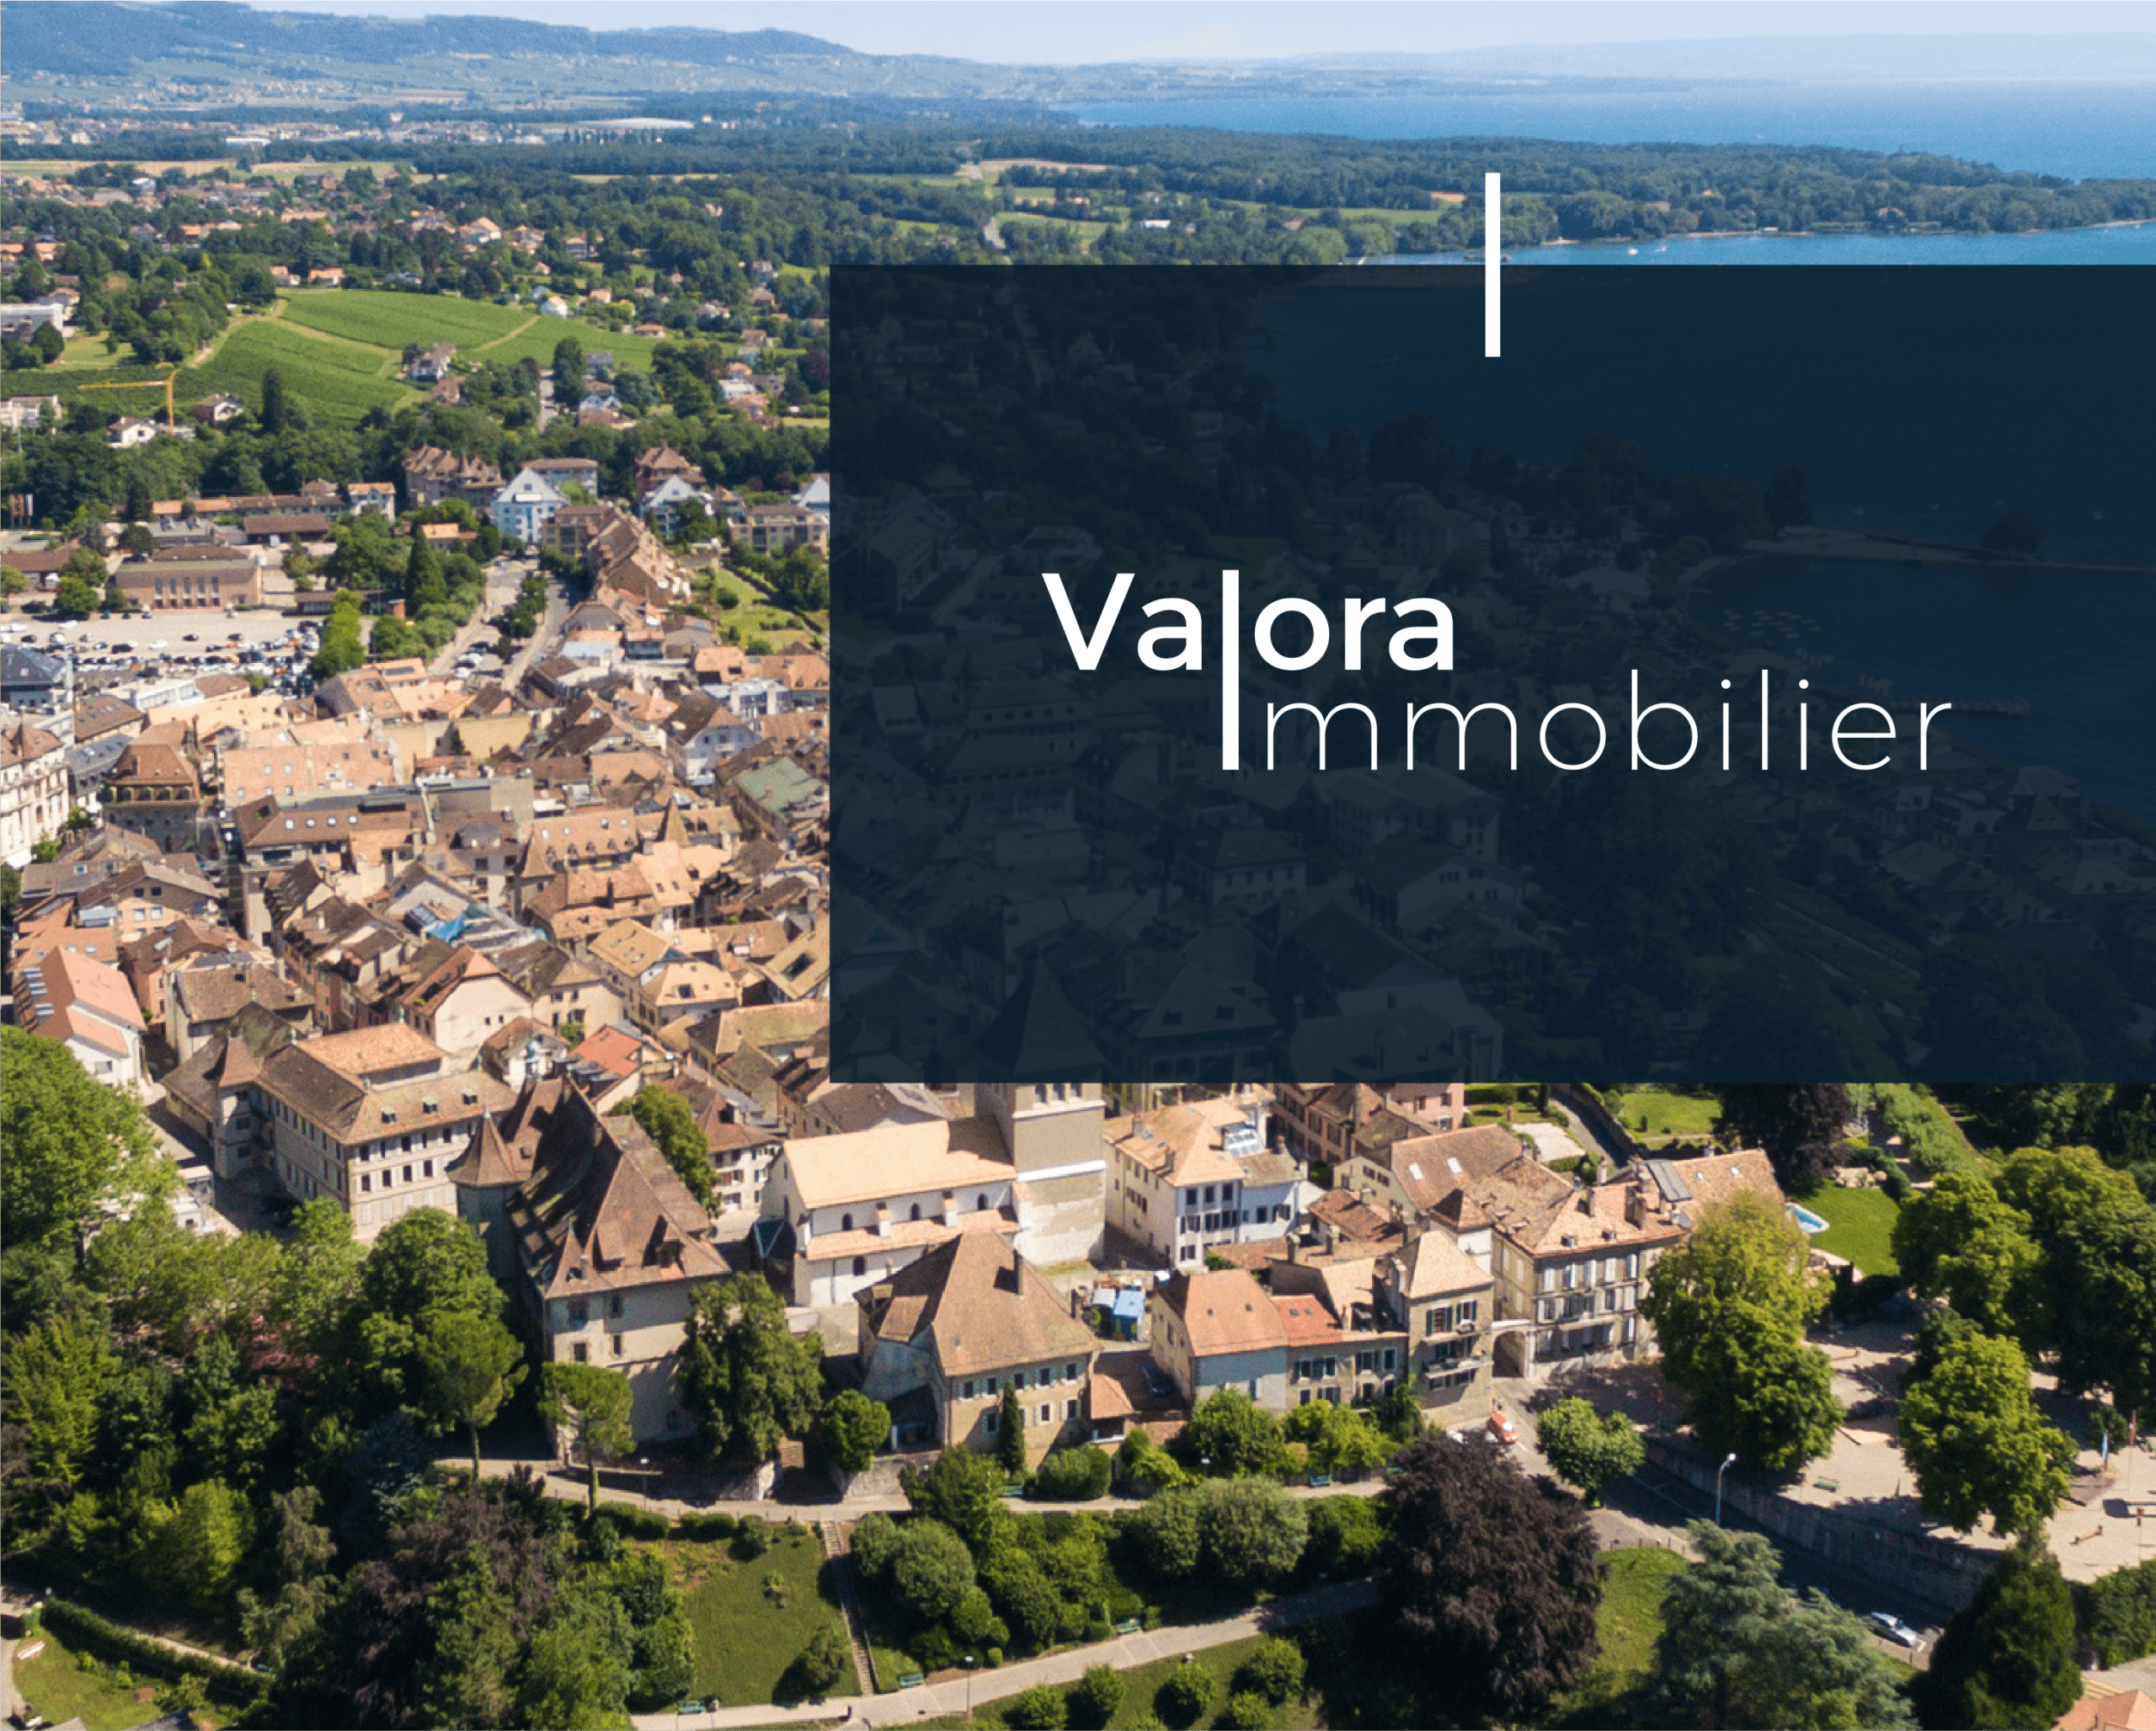 Valora Immobilier